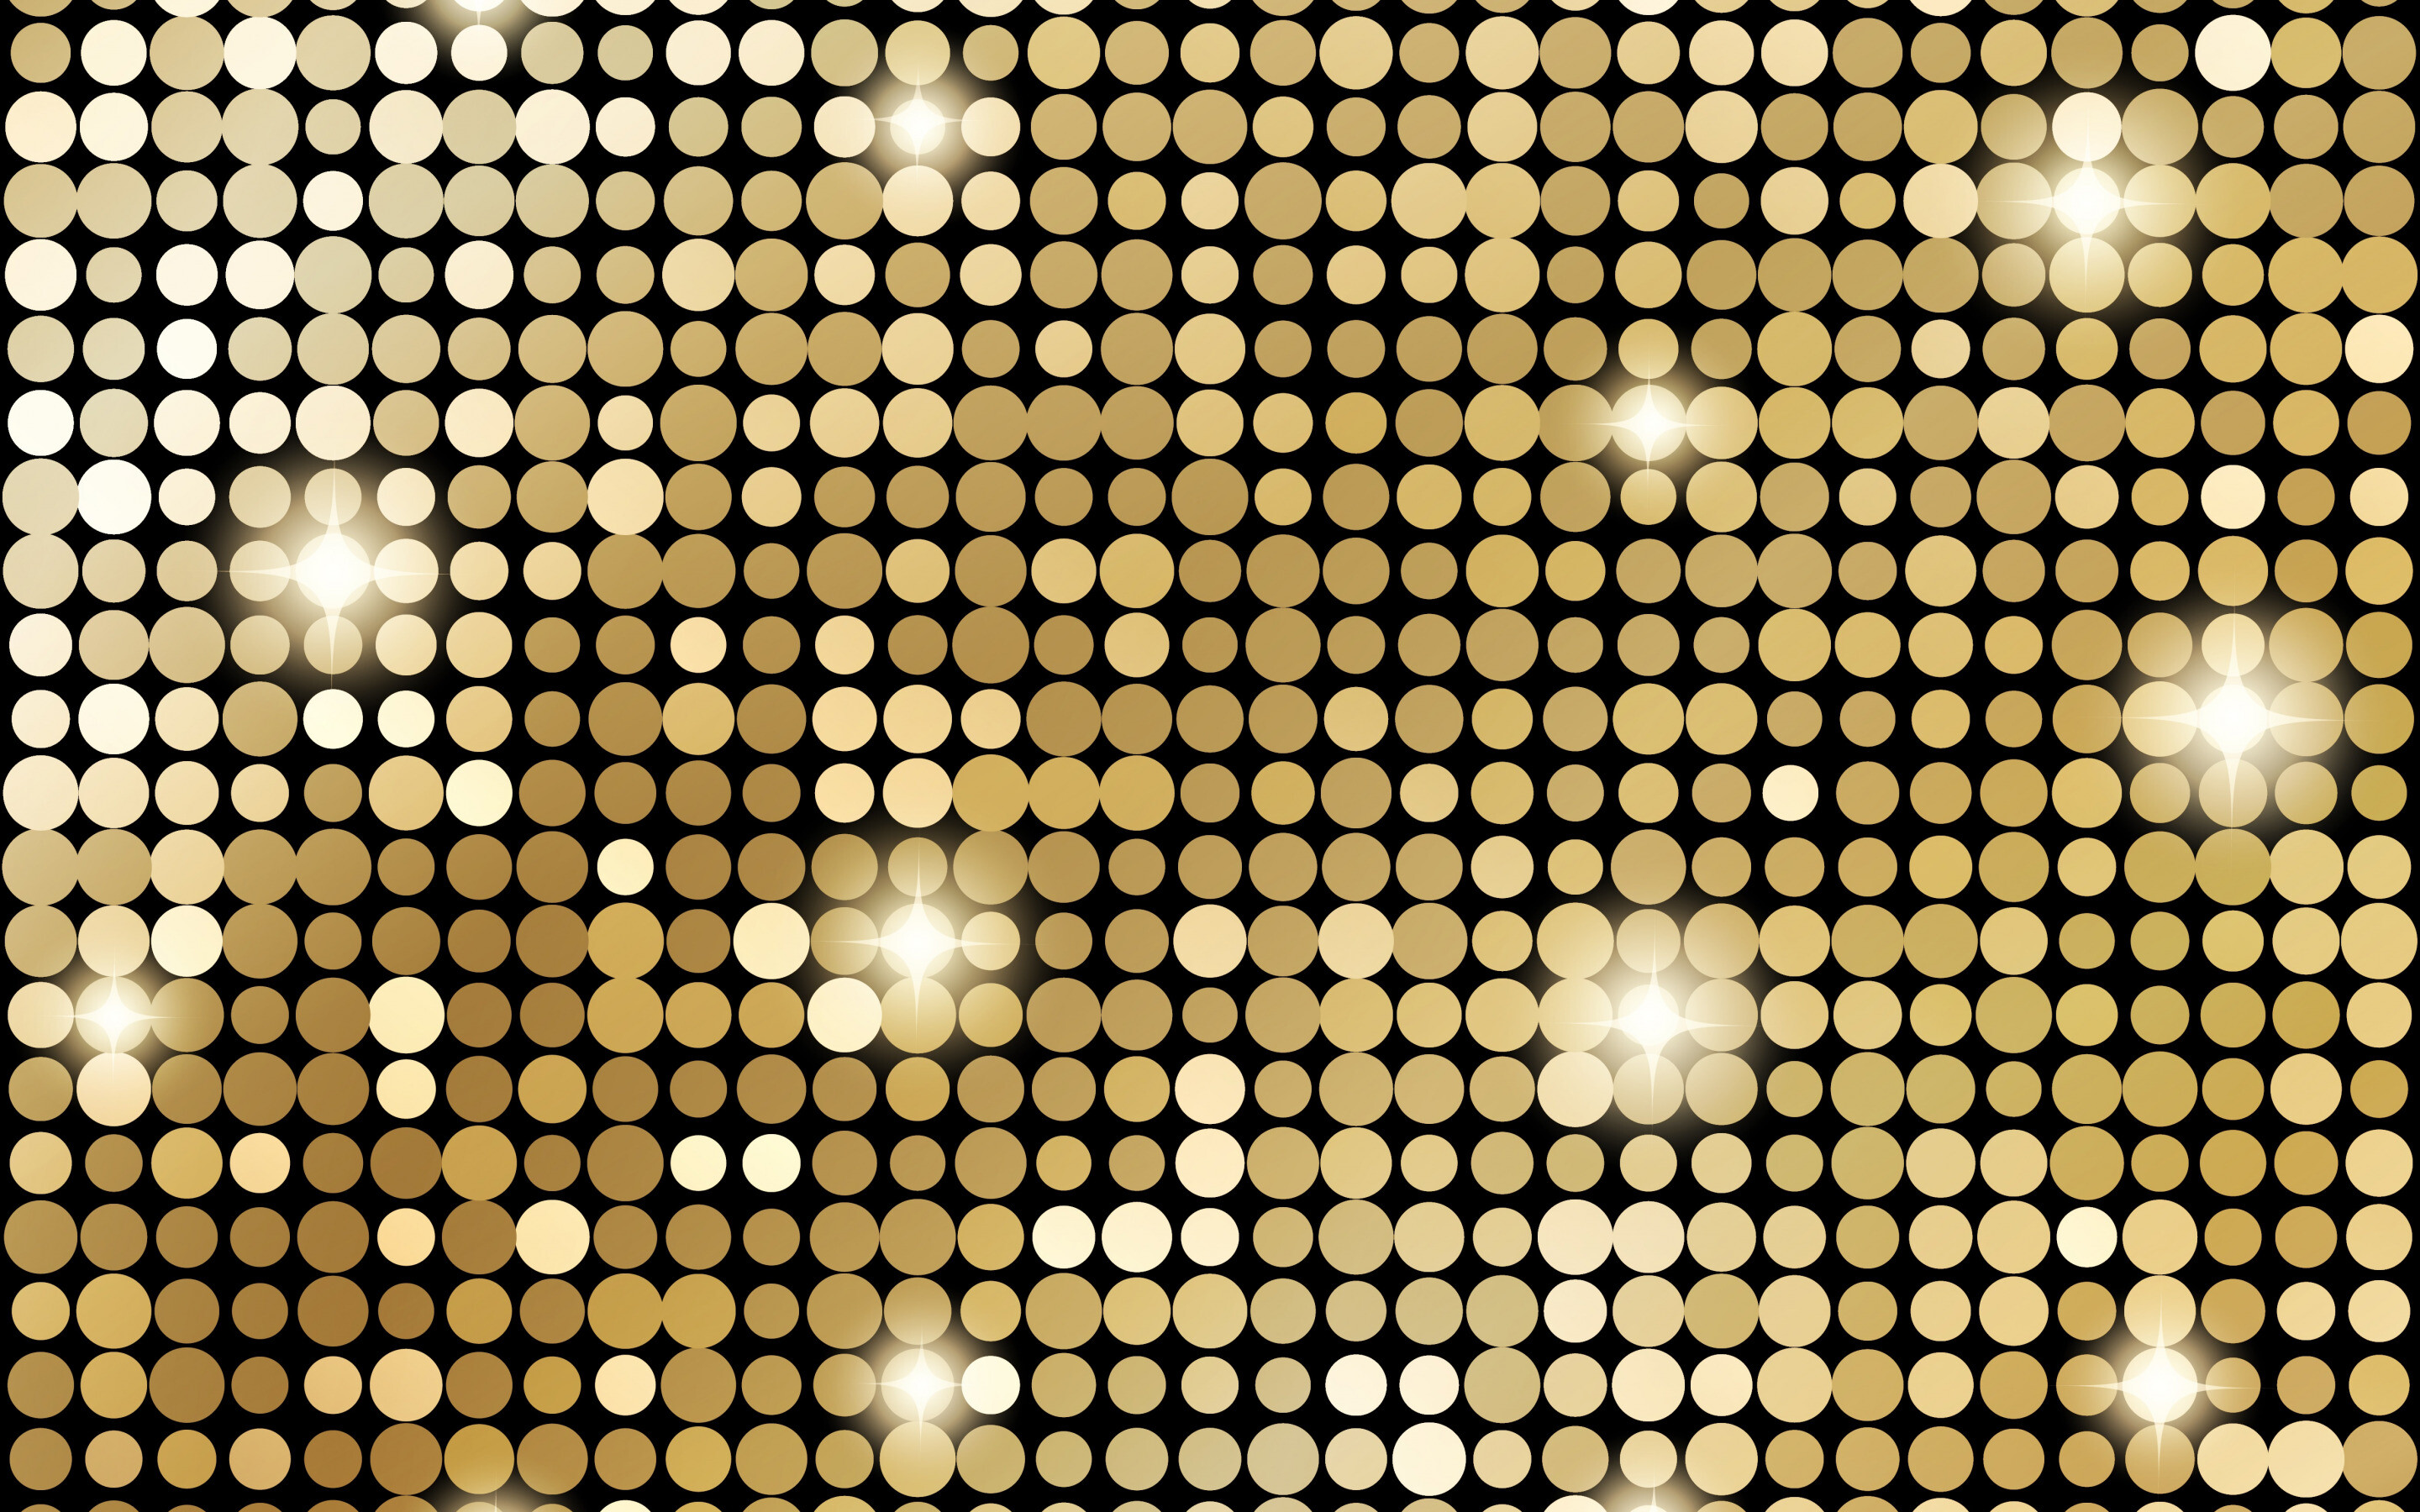 Gold Dots: Black and gold Polka-dotted design, A number of geometric arrangements of shining circles. 2880x1800 HD Wallpaper.